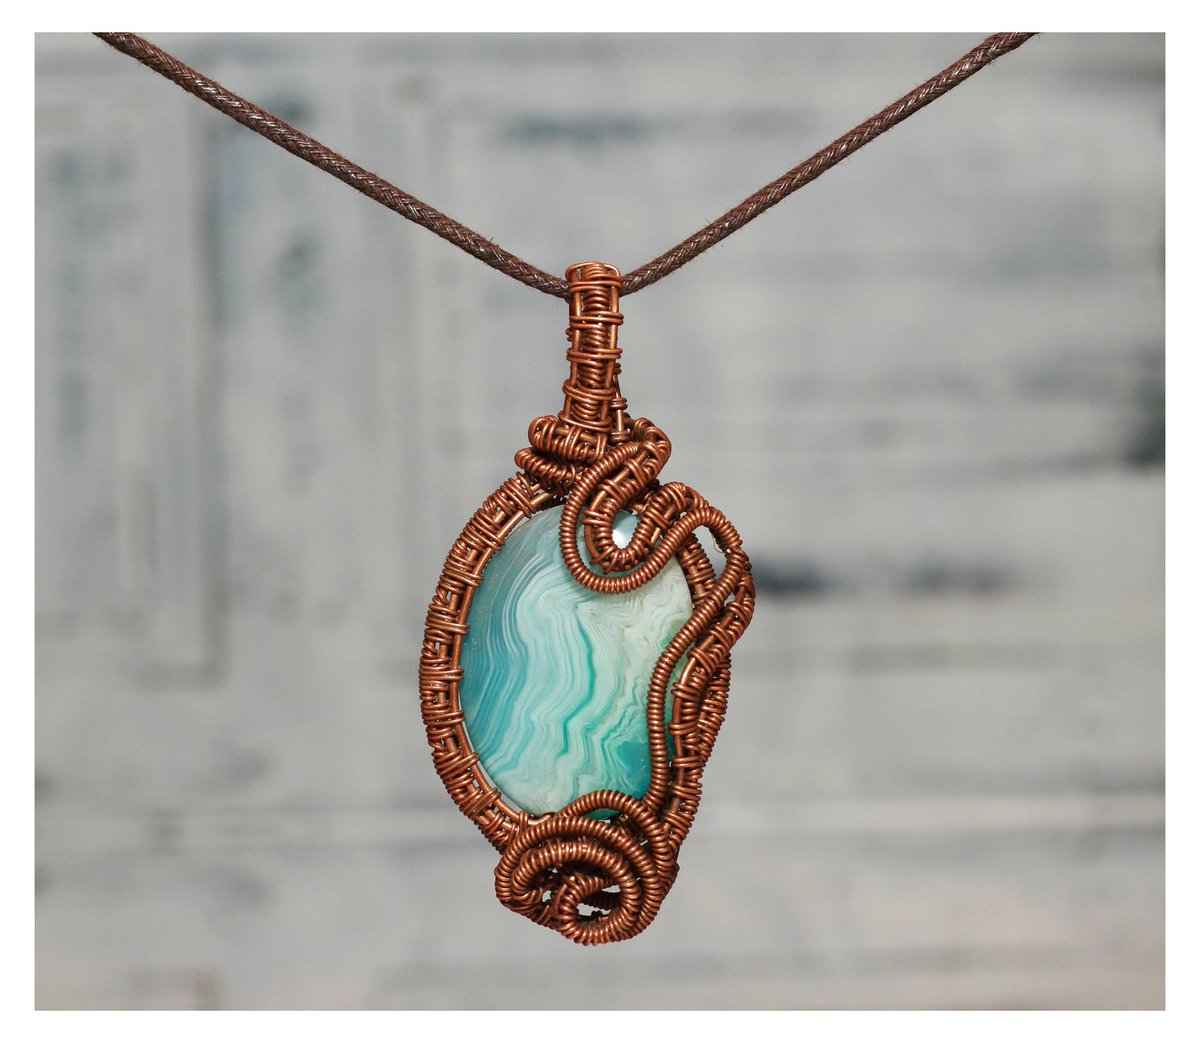 Excited to share the latest addition to my #etsy shop: #SeaBreeze #Necklace, #WirewrappedPendant, Abstract Pendant, #TealAgate, #TealPendant, #Copper #Wirewrap, #BohemianNecklace, $Summer #Wedding etsy.me/3d9R8qQ